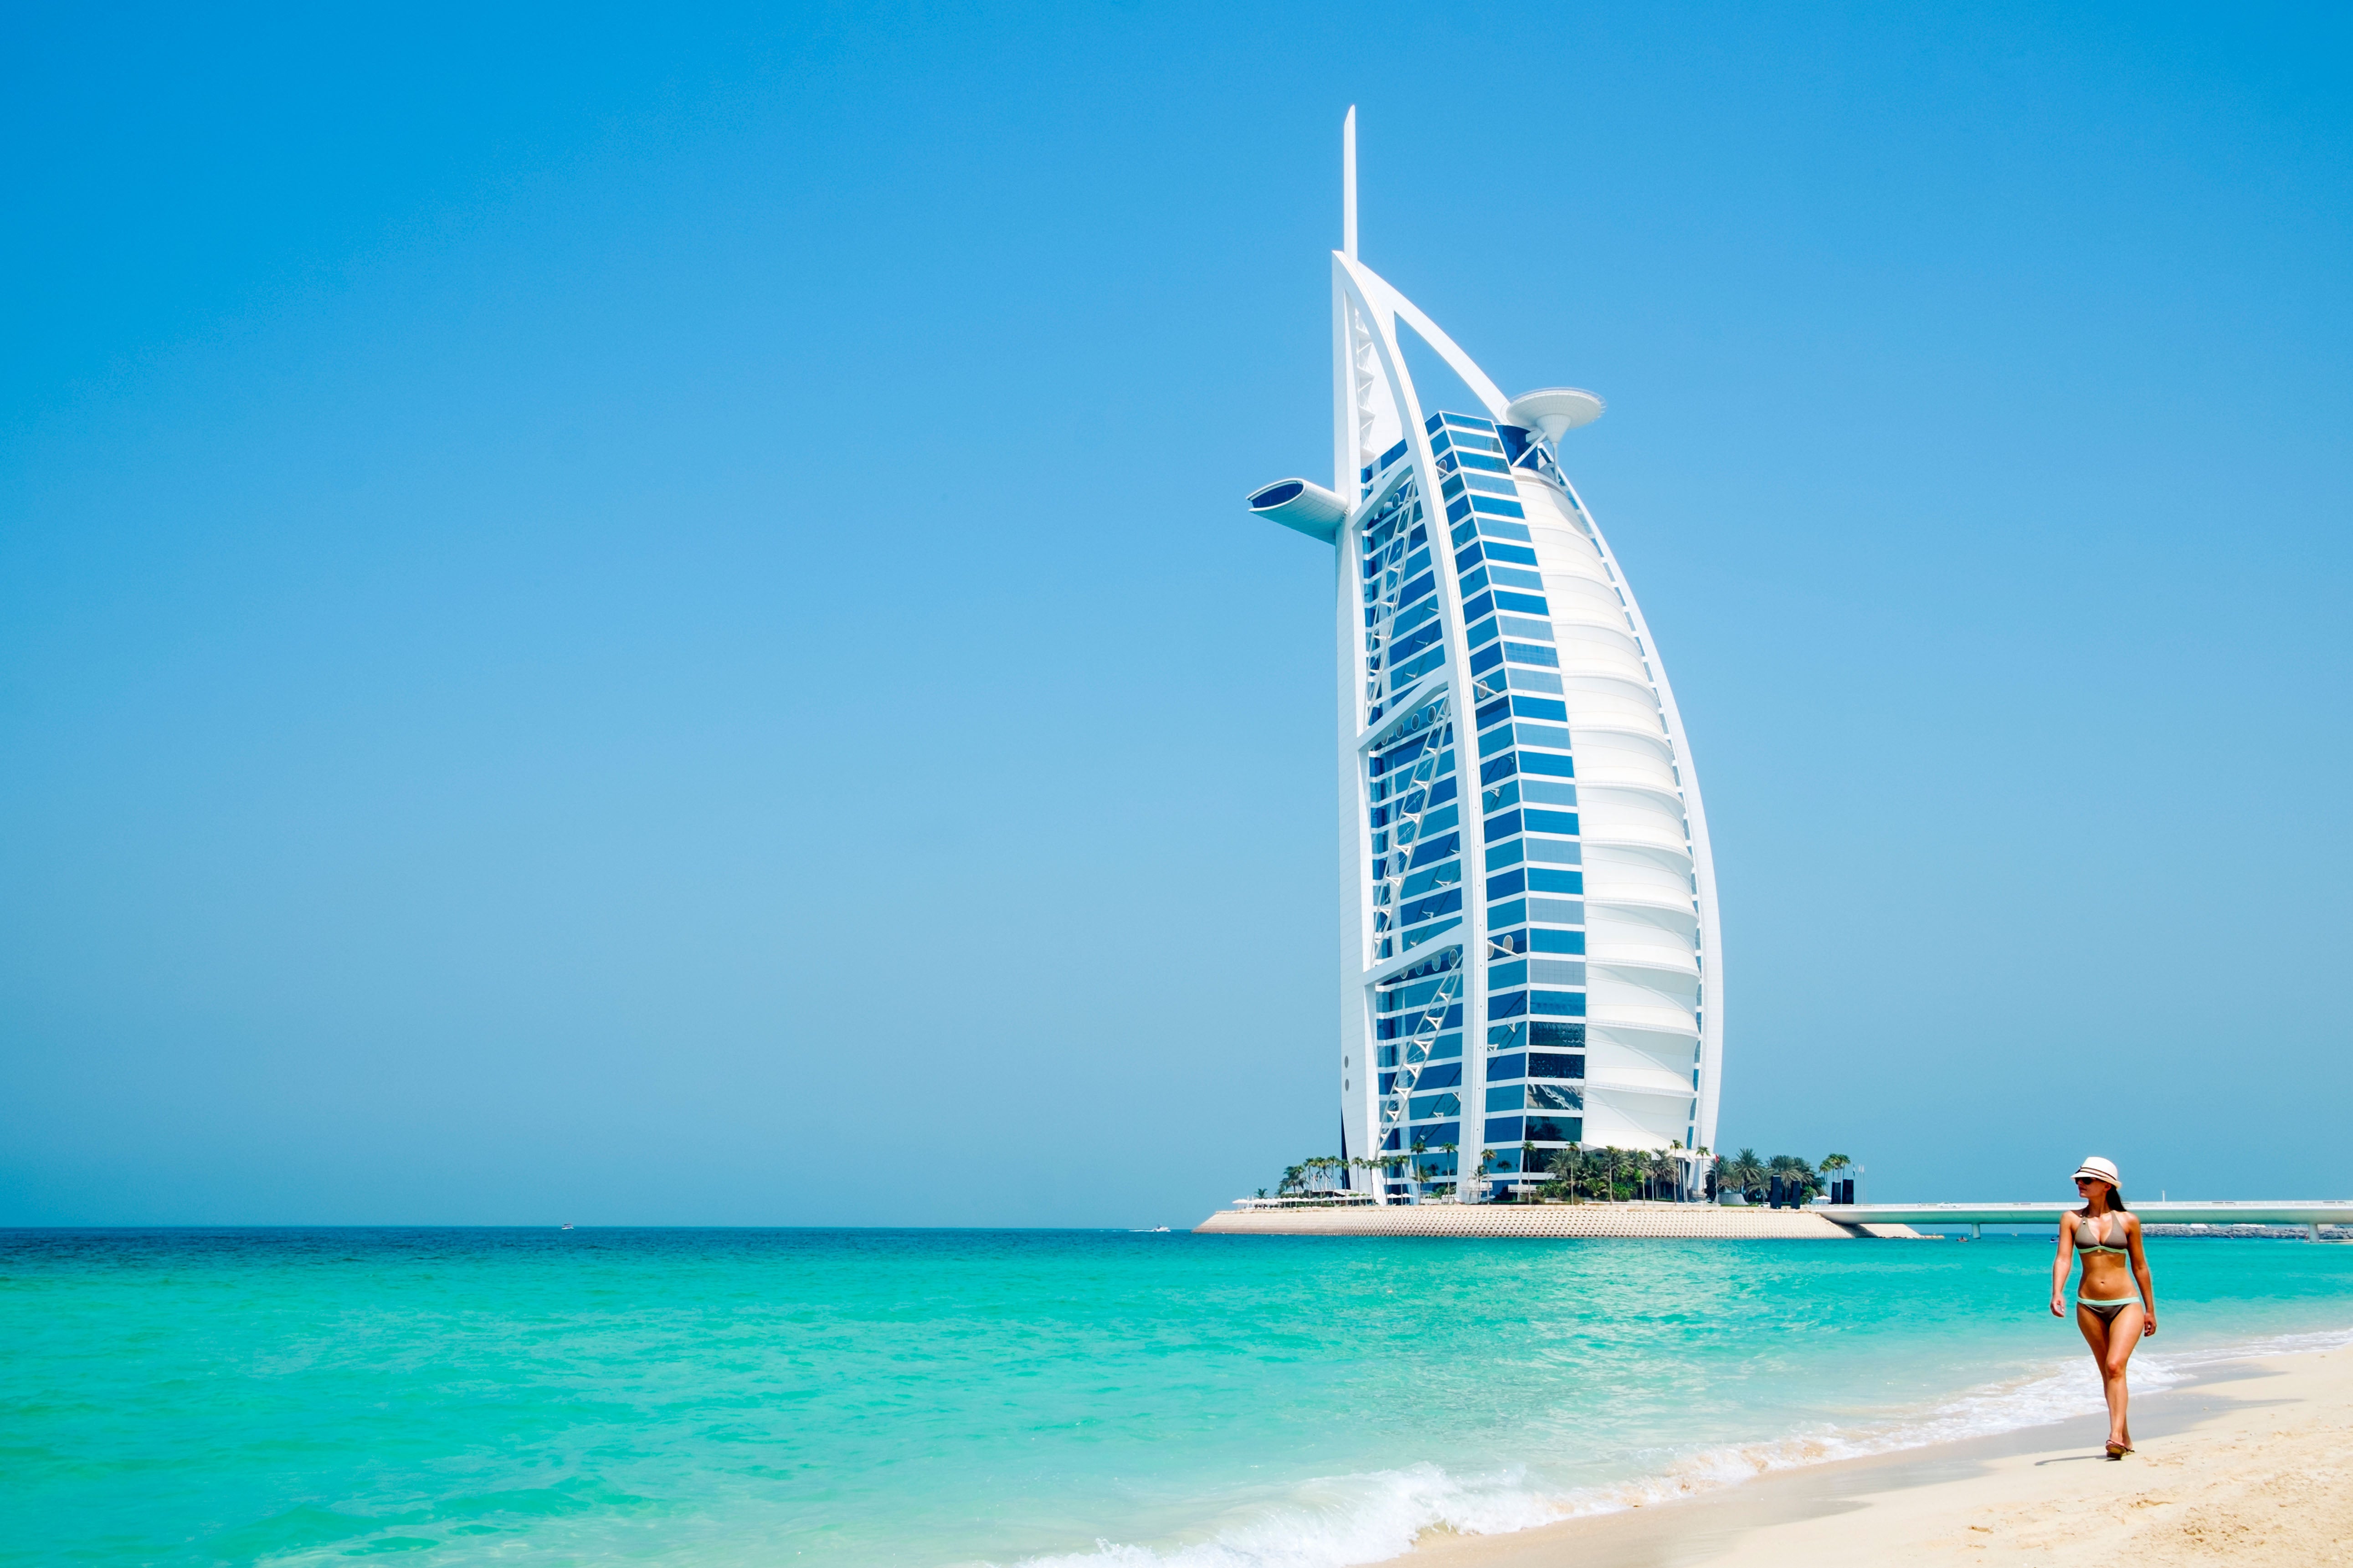 Dubai’s blue skies, turquoise seas and golden shores are made for sunseekers